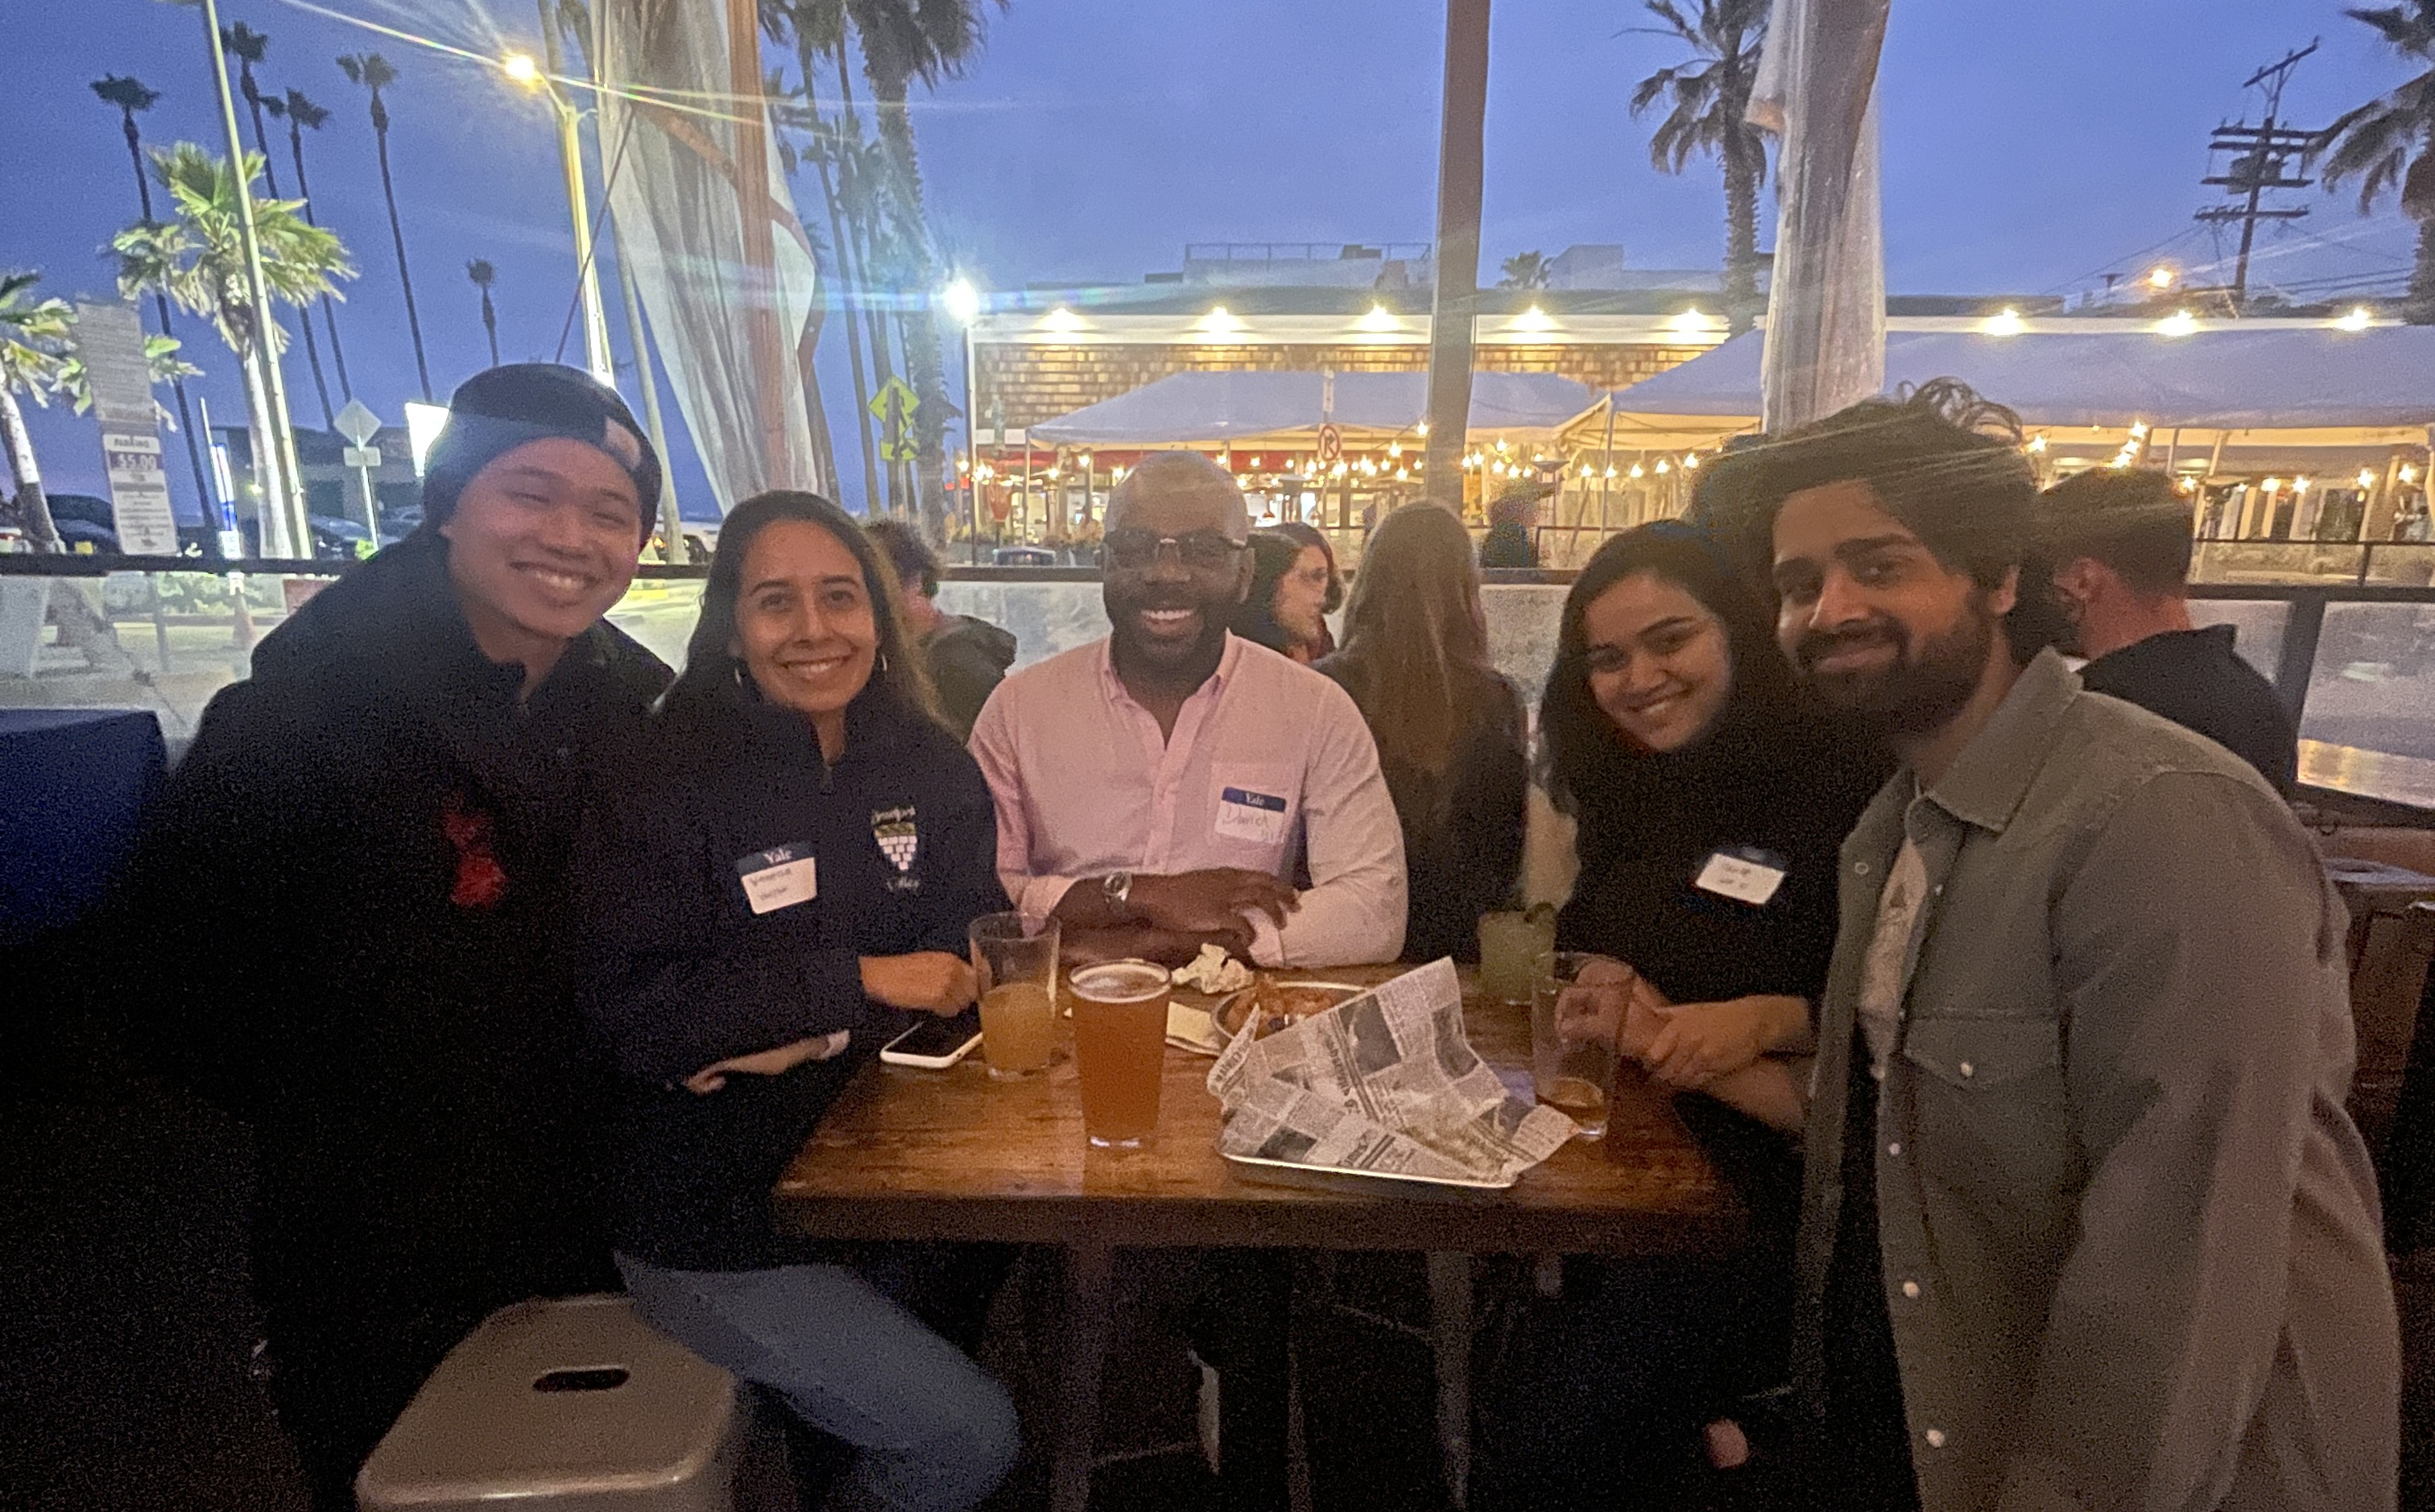 Alumni gather for a Yale happy hour in Venice Beach, CA